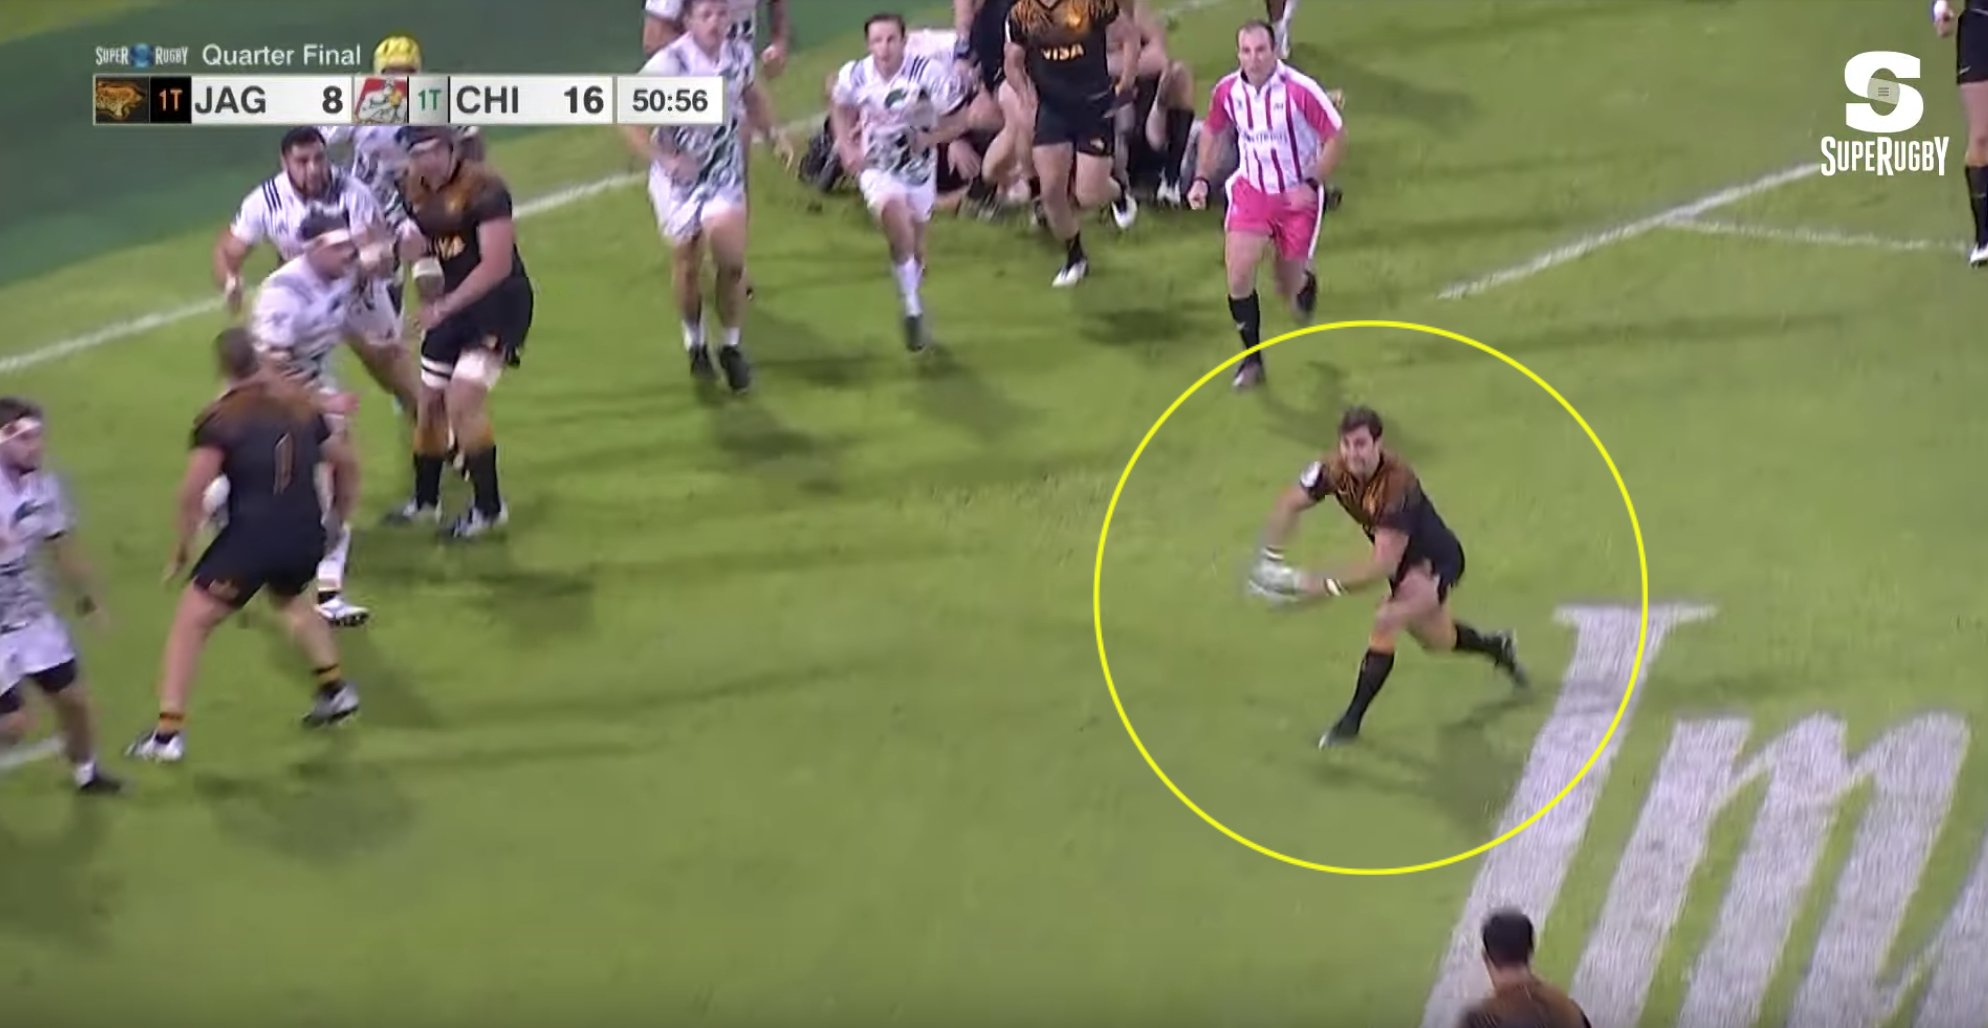 WATCH: The try that sent the Jaguares to their first Super Rugby semi final